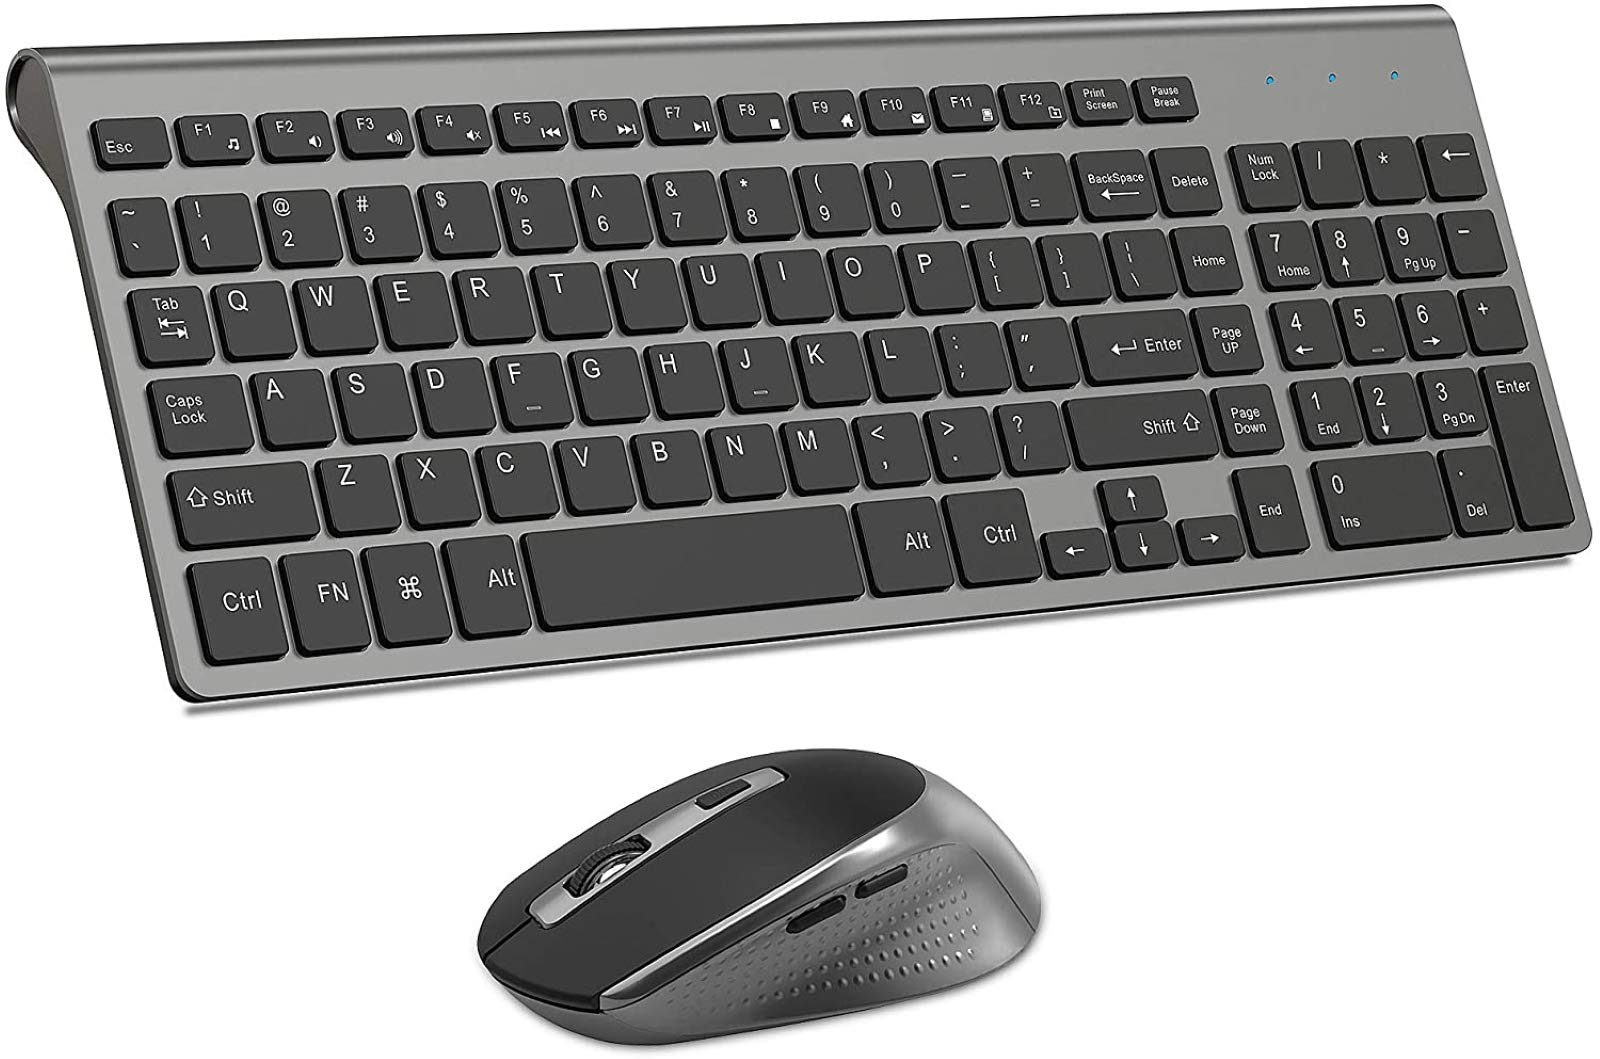 Wireless Keyboard Mouse Combo, J JOYACCESS Cordless Keyboard and Mouse Set, 2.4G Ergonomic Computer Keyboard Mouse for PC,Windows, Computer, Laptop, Desktop, Chromebook,Mac-GreyWebcam 1080P Full HD, Webcam with Microphone for PC, USB 2.0 Web Camera, Webcam for Video Calls, Plug and Play, Recording, Studying, Game and Conferencing on Zoom/YouTube and skype
